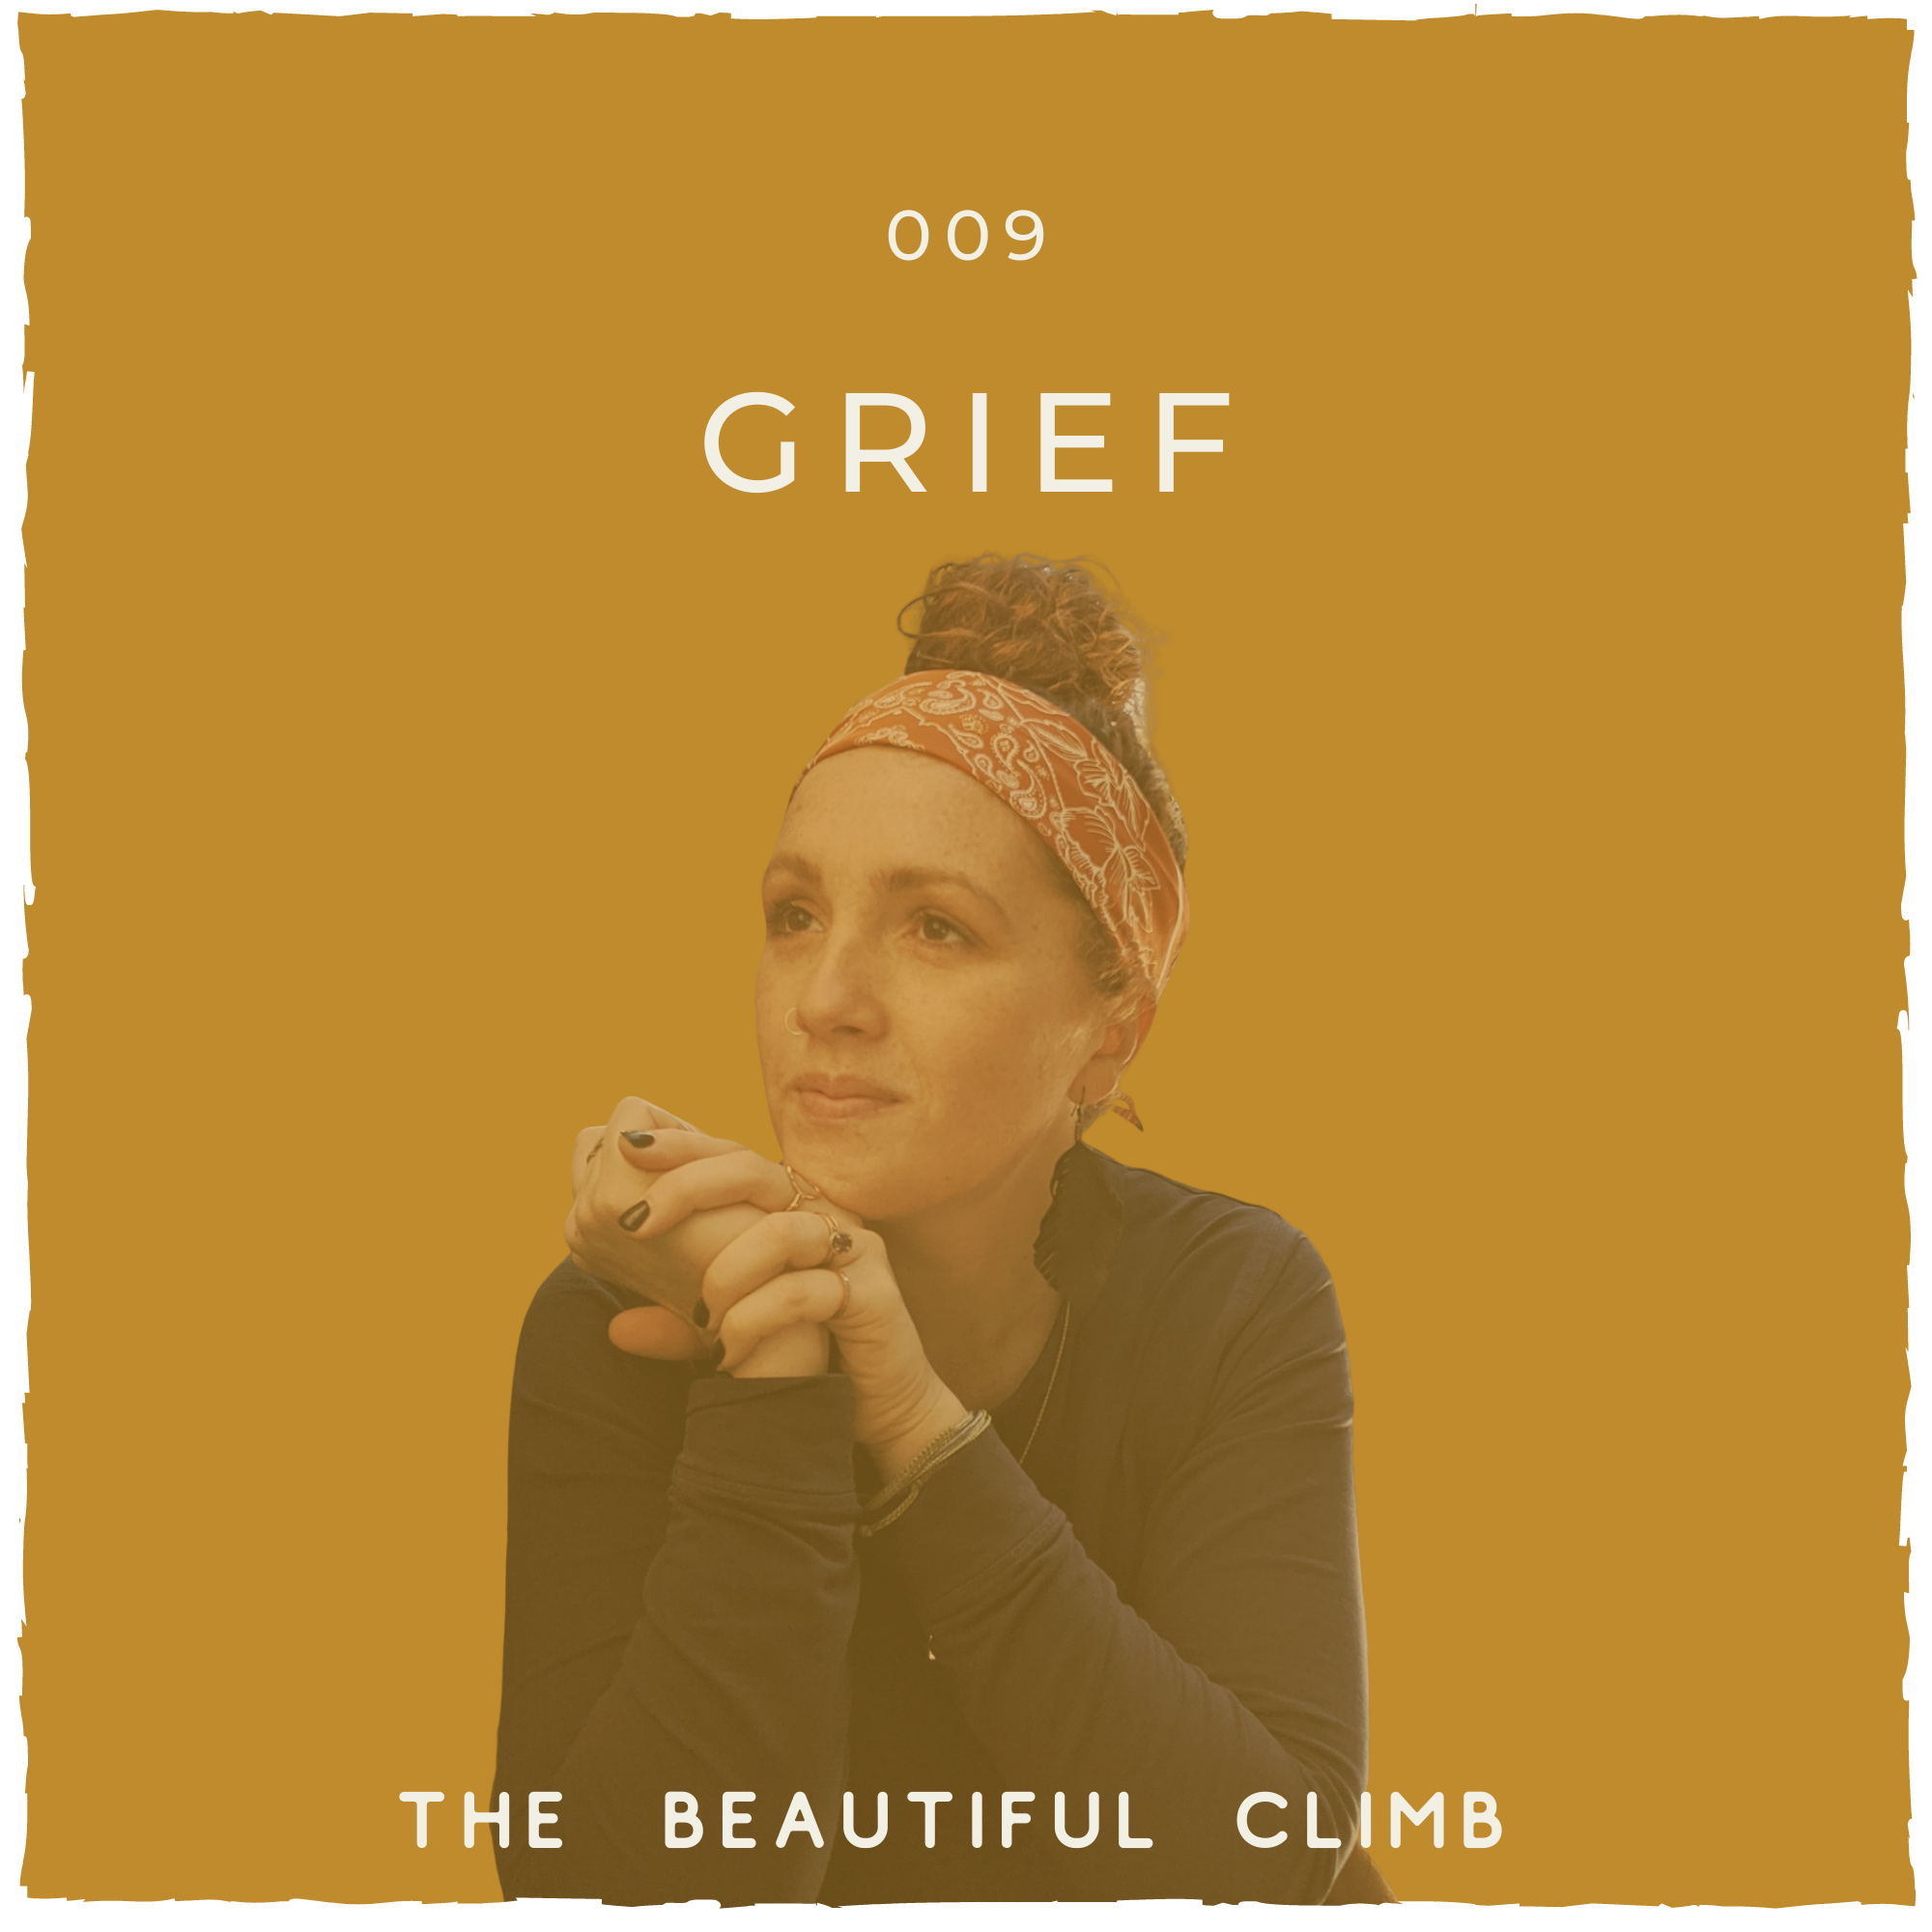 In 2009, I lost my brother to cancer. He battled cancer for a little over a year. This loss was not my first experience with grief, but it was the one that impacted my life the most. Recently, I listened to a beautiful and impactful podcast with Brene Brown and David Kessler on Grief and Finding Meaning. It inspired me to share my own story with grief and how I’ve found meaning in the grieving process for the first time ever on the podcast. | Episode 8 of The Beautiful Climb Podcast with Michelle Knight